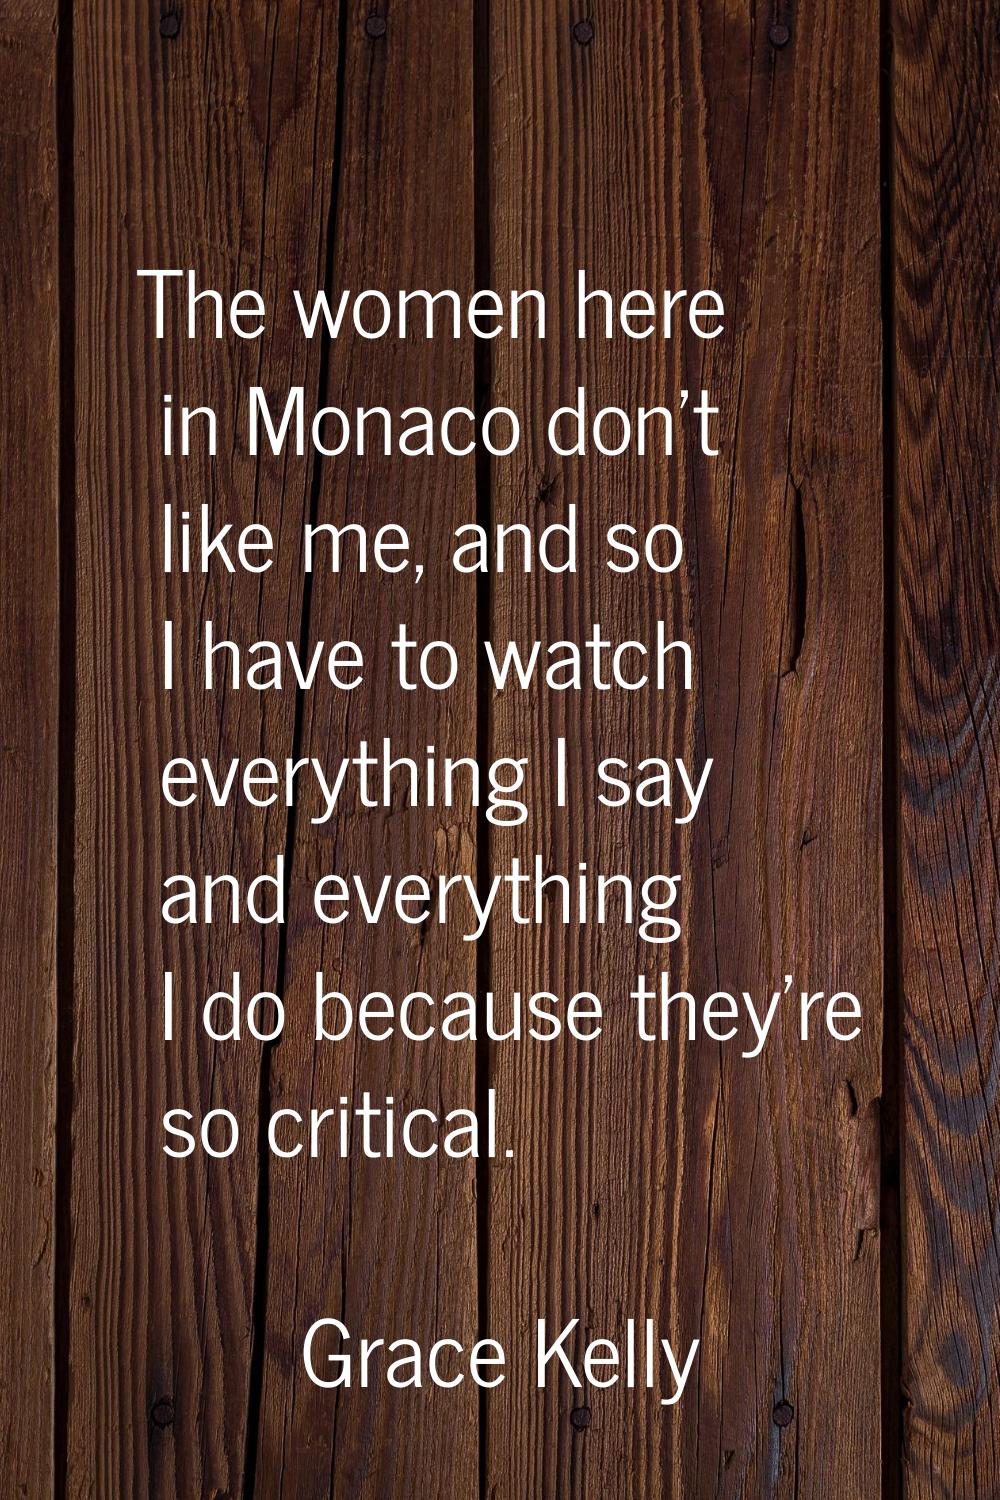 The women here in Monaco don't like me, and so I have to watch everything I say and everything I do